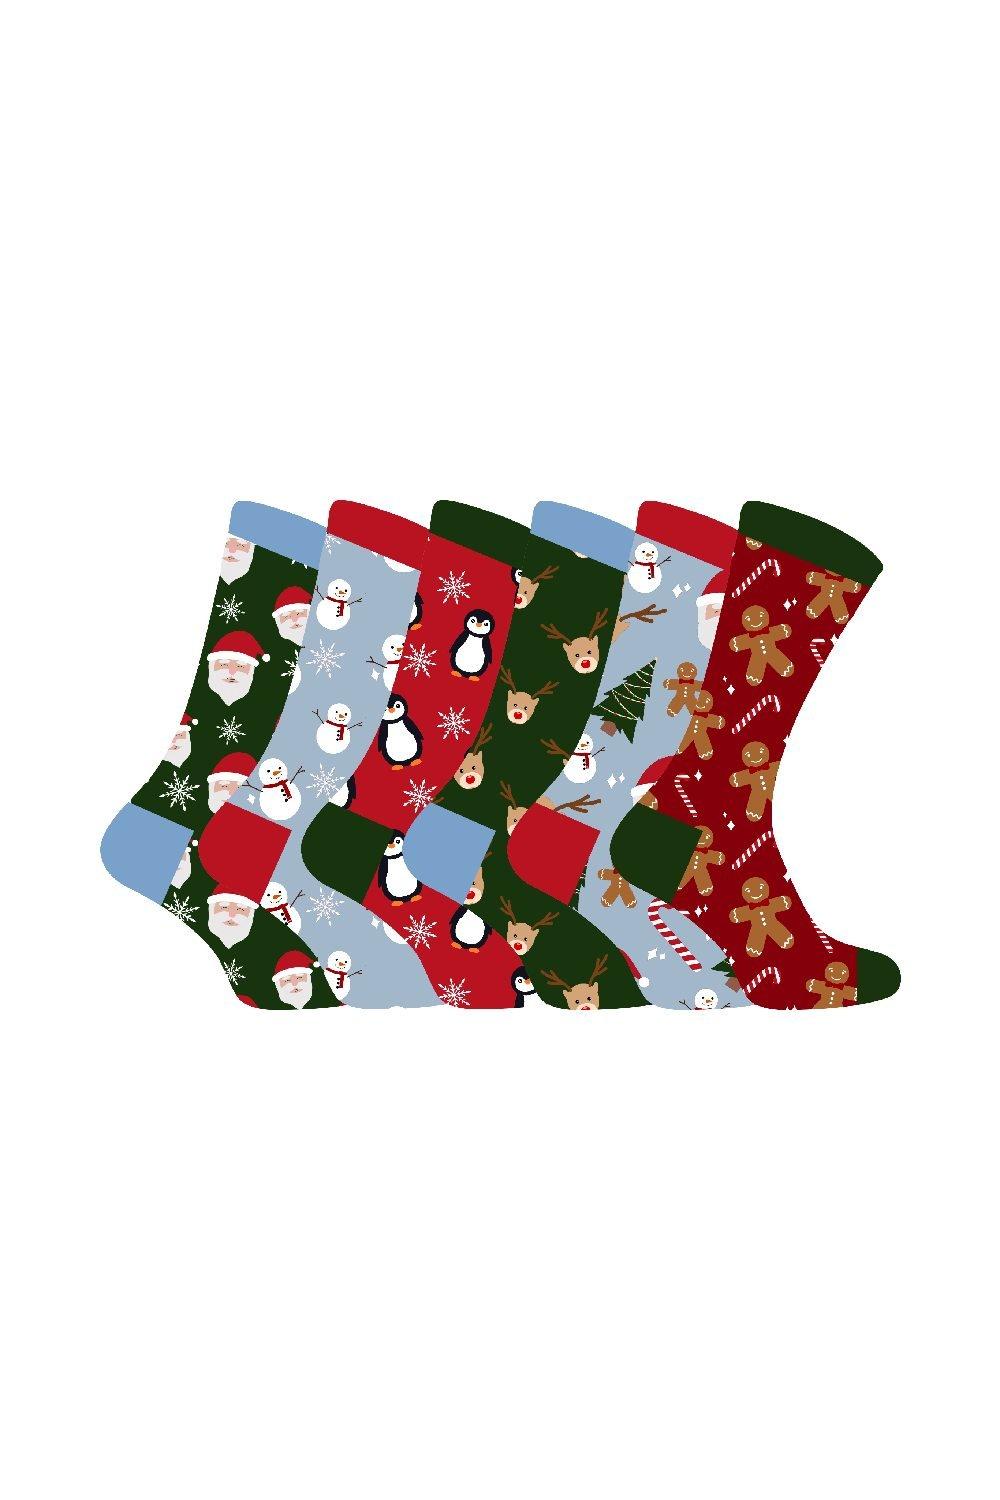 6 Pairs Christmas Patterned Novelty Colourful Socks